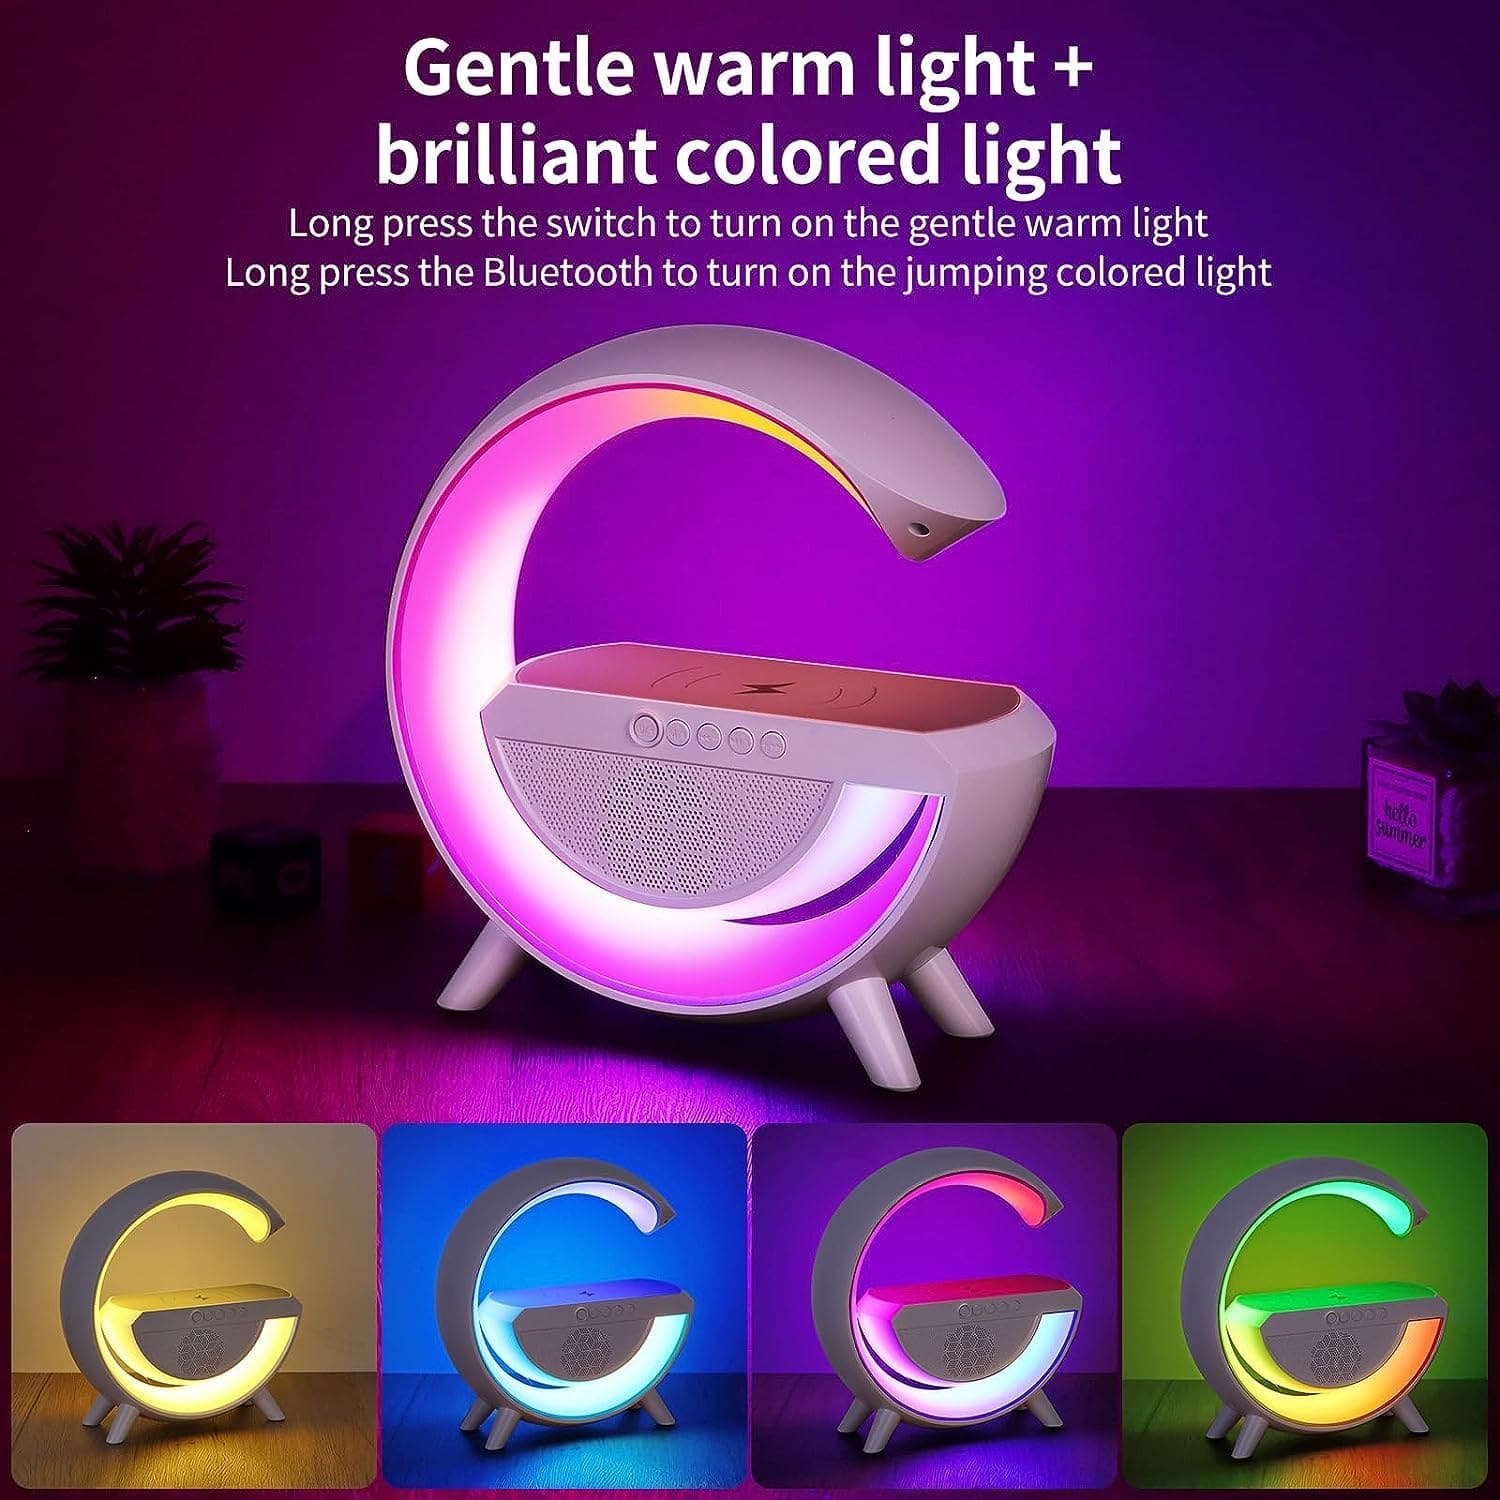 3 In 1 G Smart Station, Multifunctional Wireless Lamp, G LED Table Stand, Dimmable Night Light Touch Lamp Alarm Clock with Music Sync, Home Office Study Bedside Decor Lamp